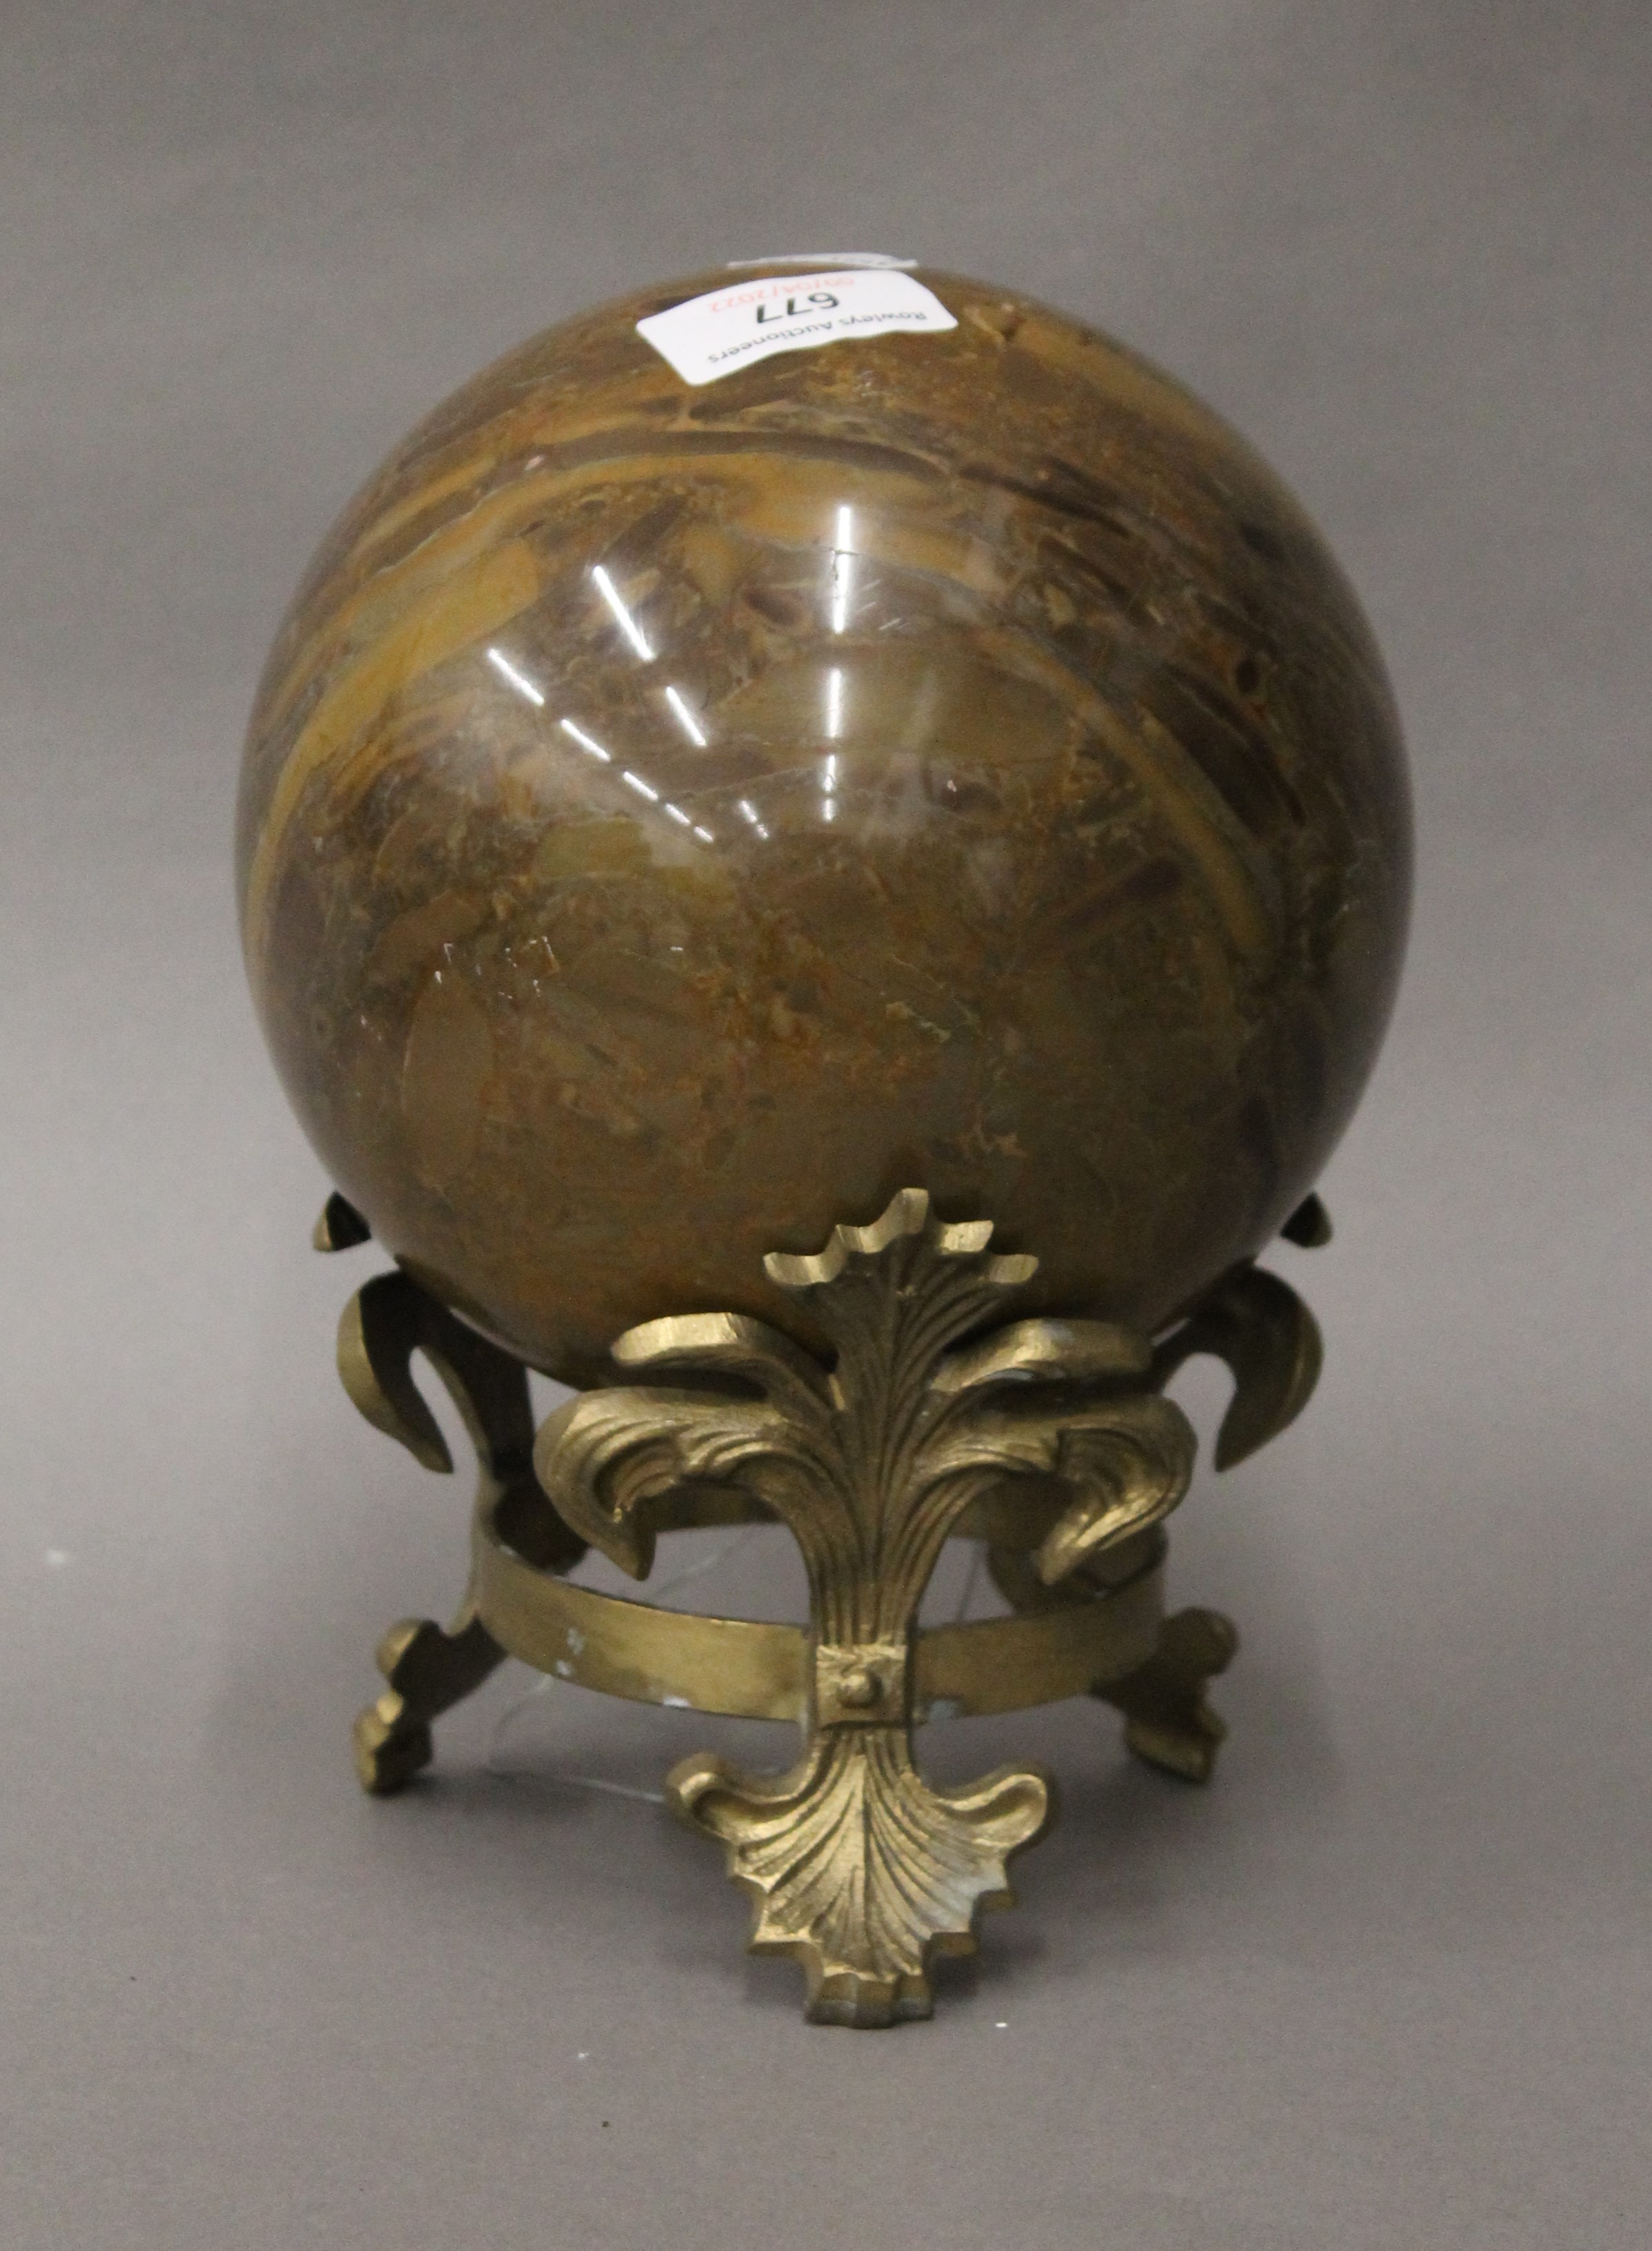 A large marble ball on a brass stand. 20 cm high overall.